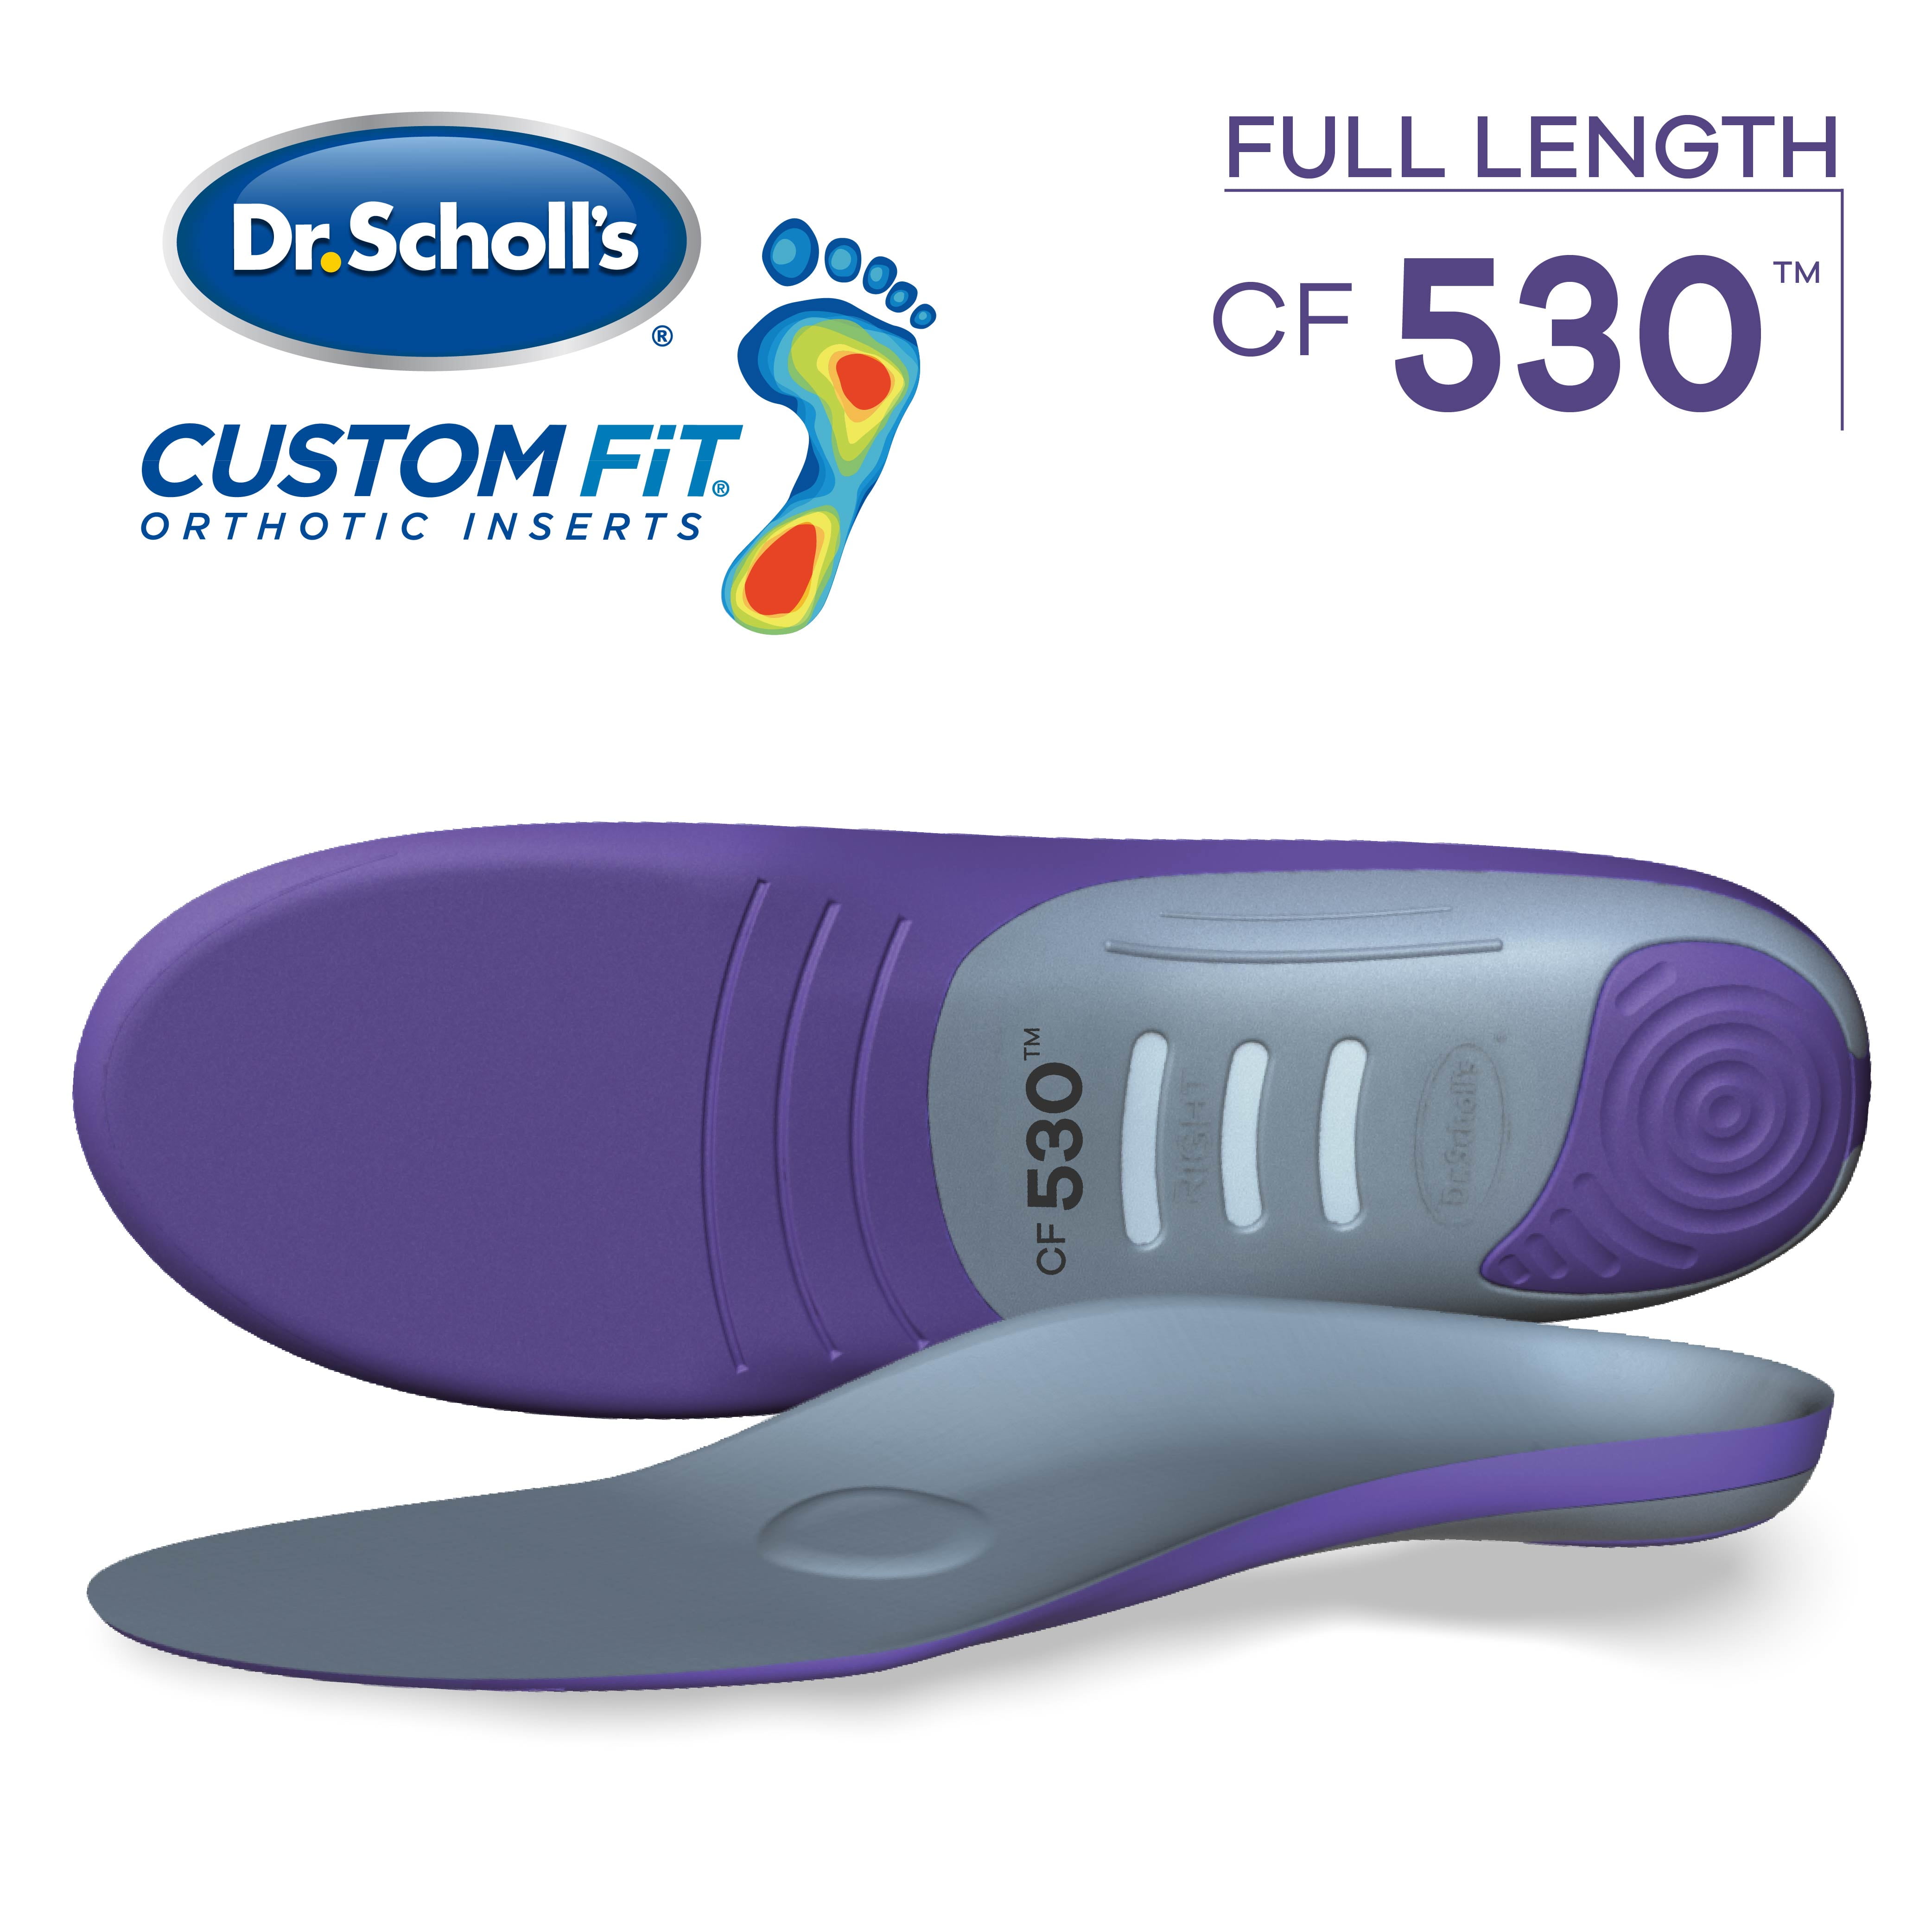 Dr. Scholl's Custom Fit 530 Orthotics Full Length Inserts for Foot Knee & Low Back Pain Relief, 1 pr